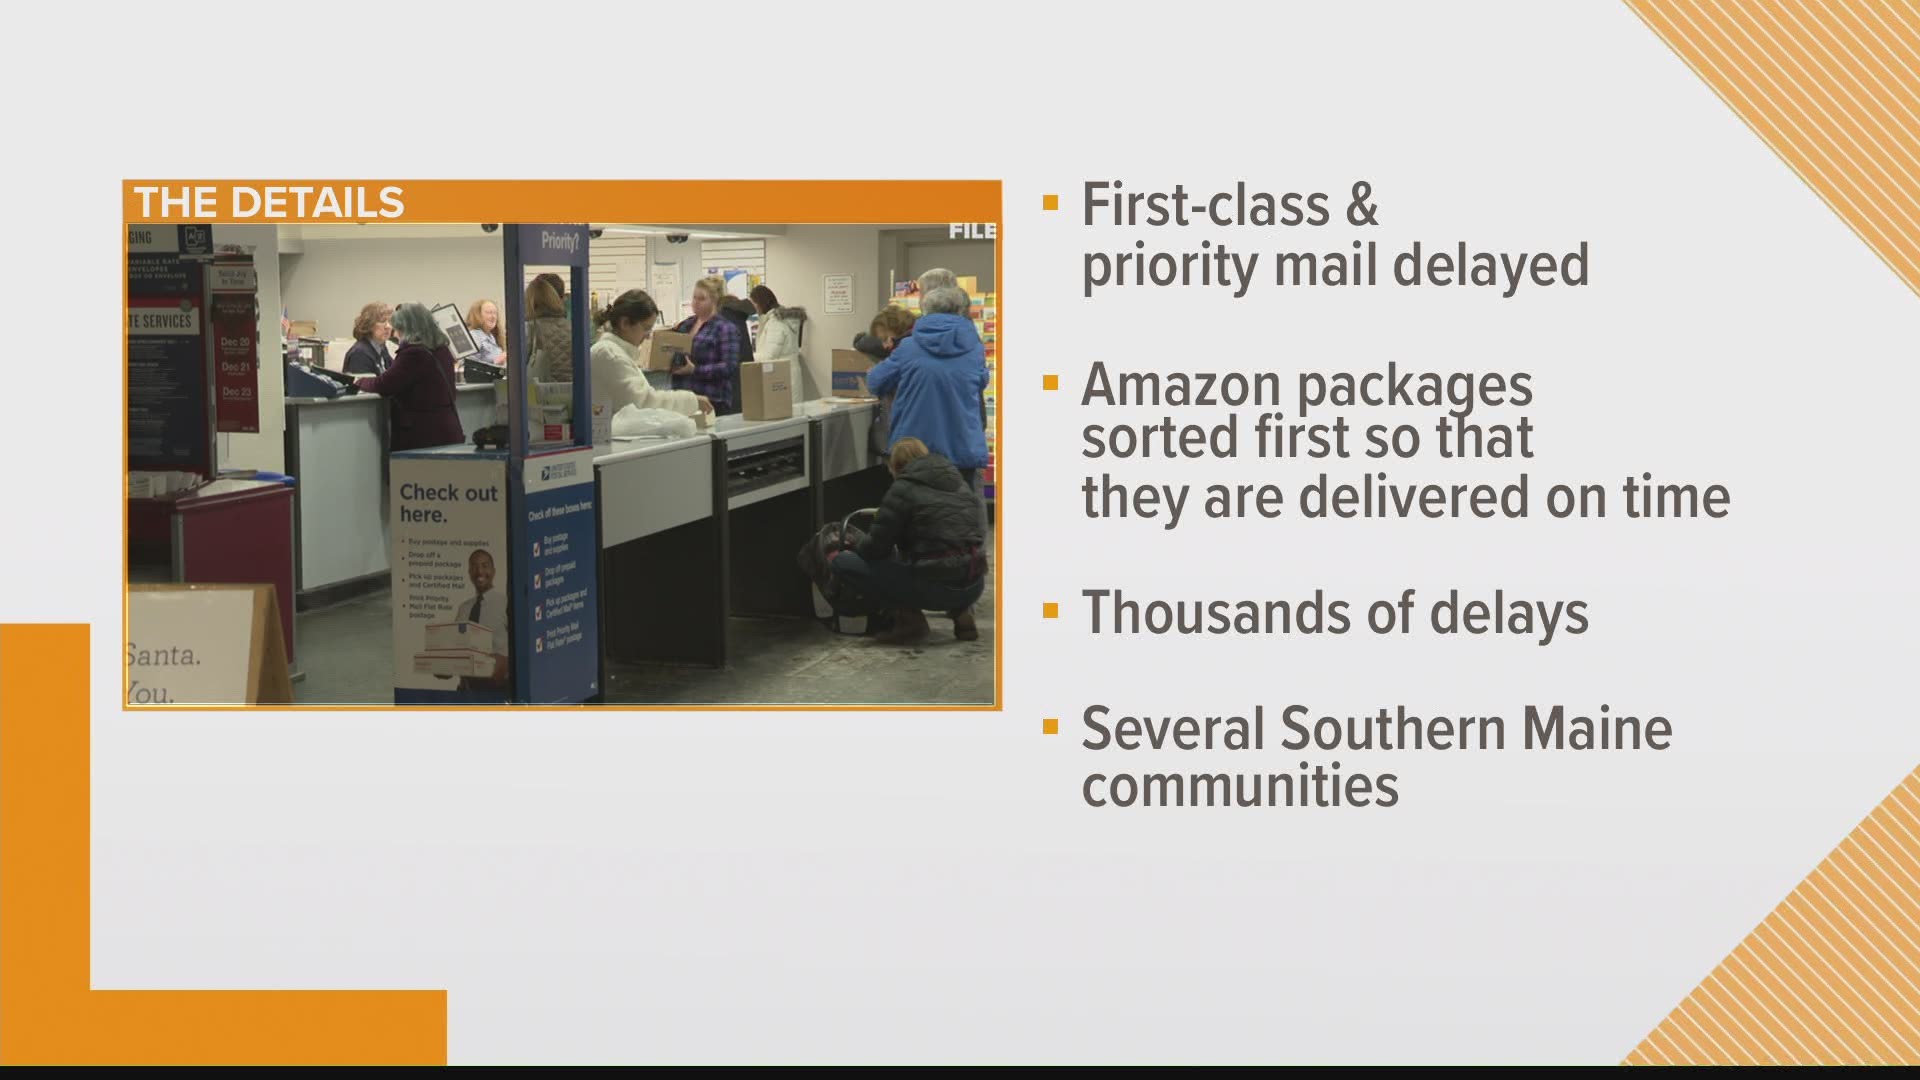 An official complaint has gone to the Office of the Inspector General stating that Amazon packages were given priority over first-class and priority mail.